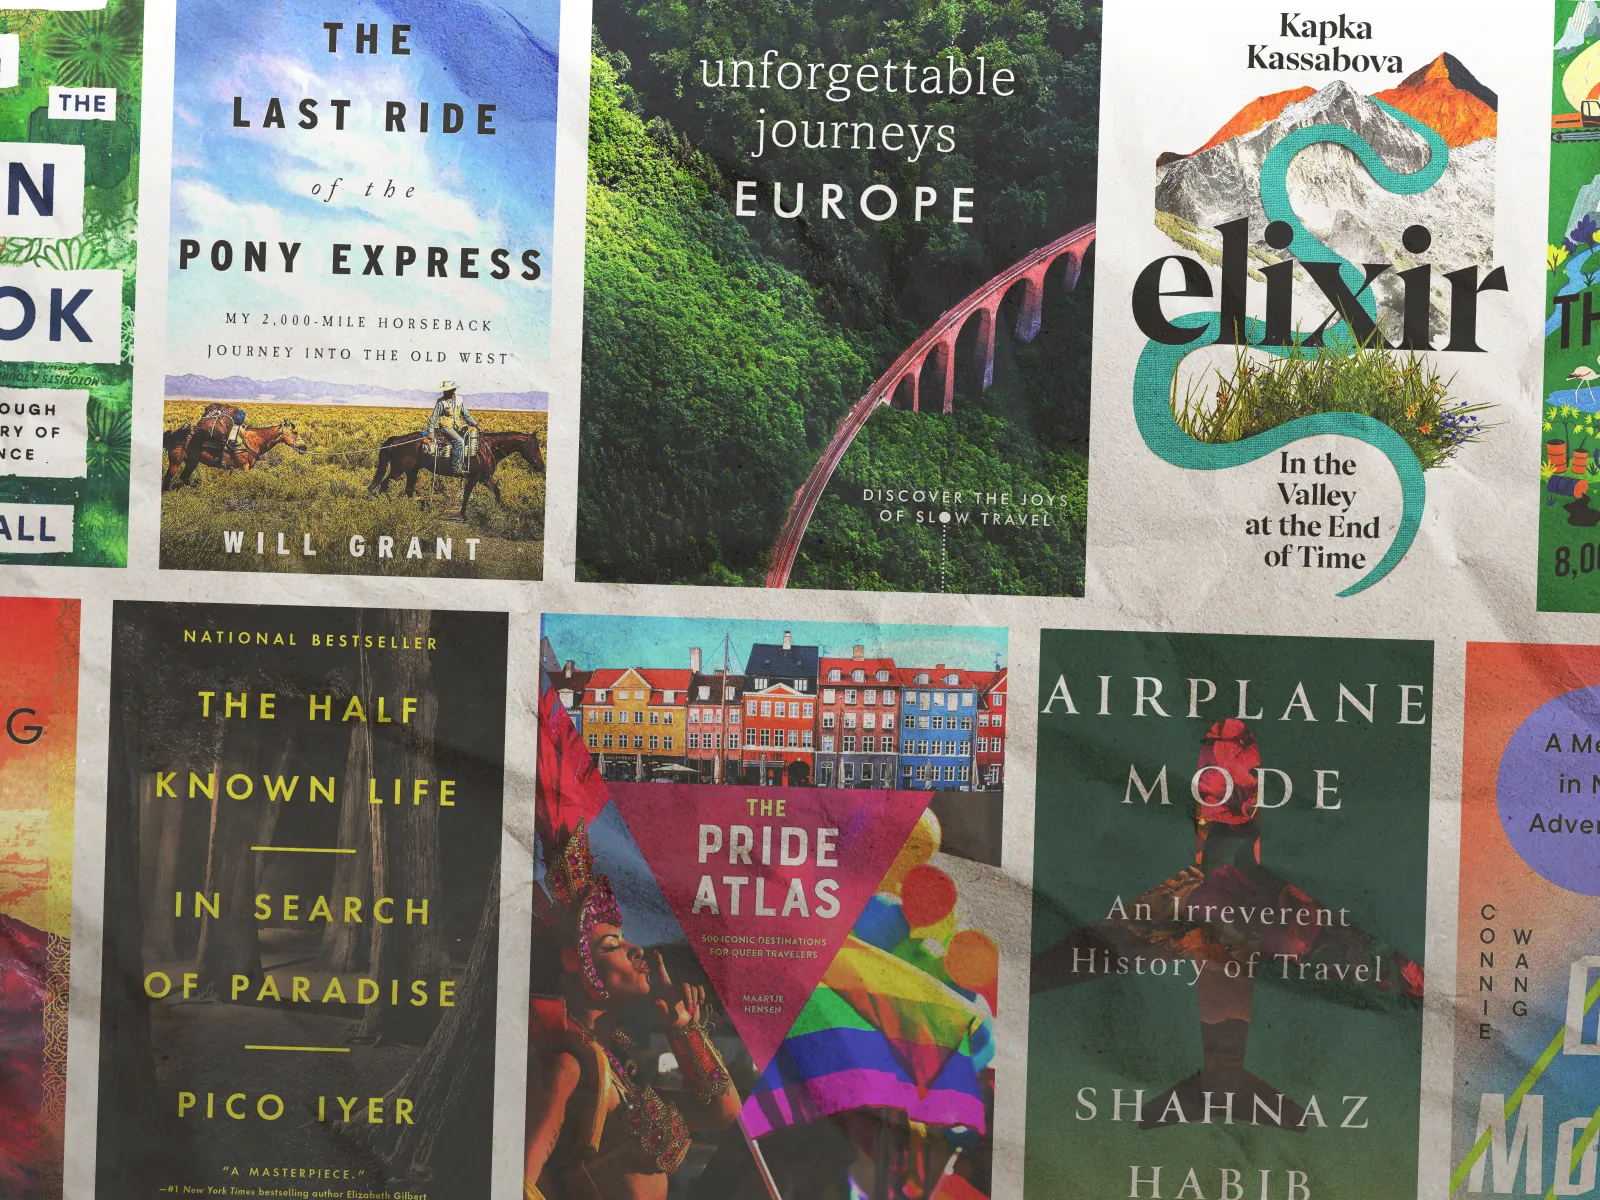 10 Adventure Travel Books to Inspire Your Next Trip